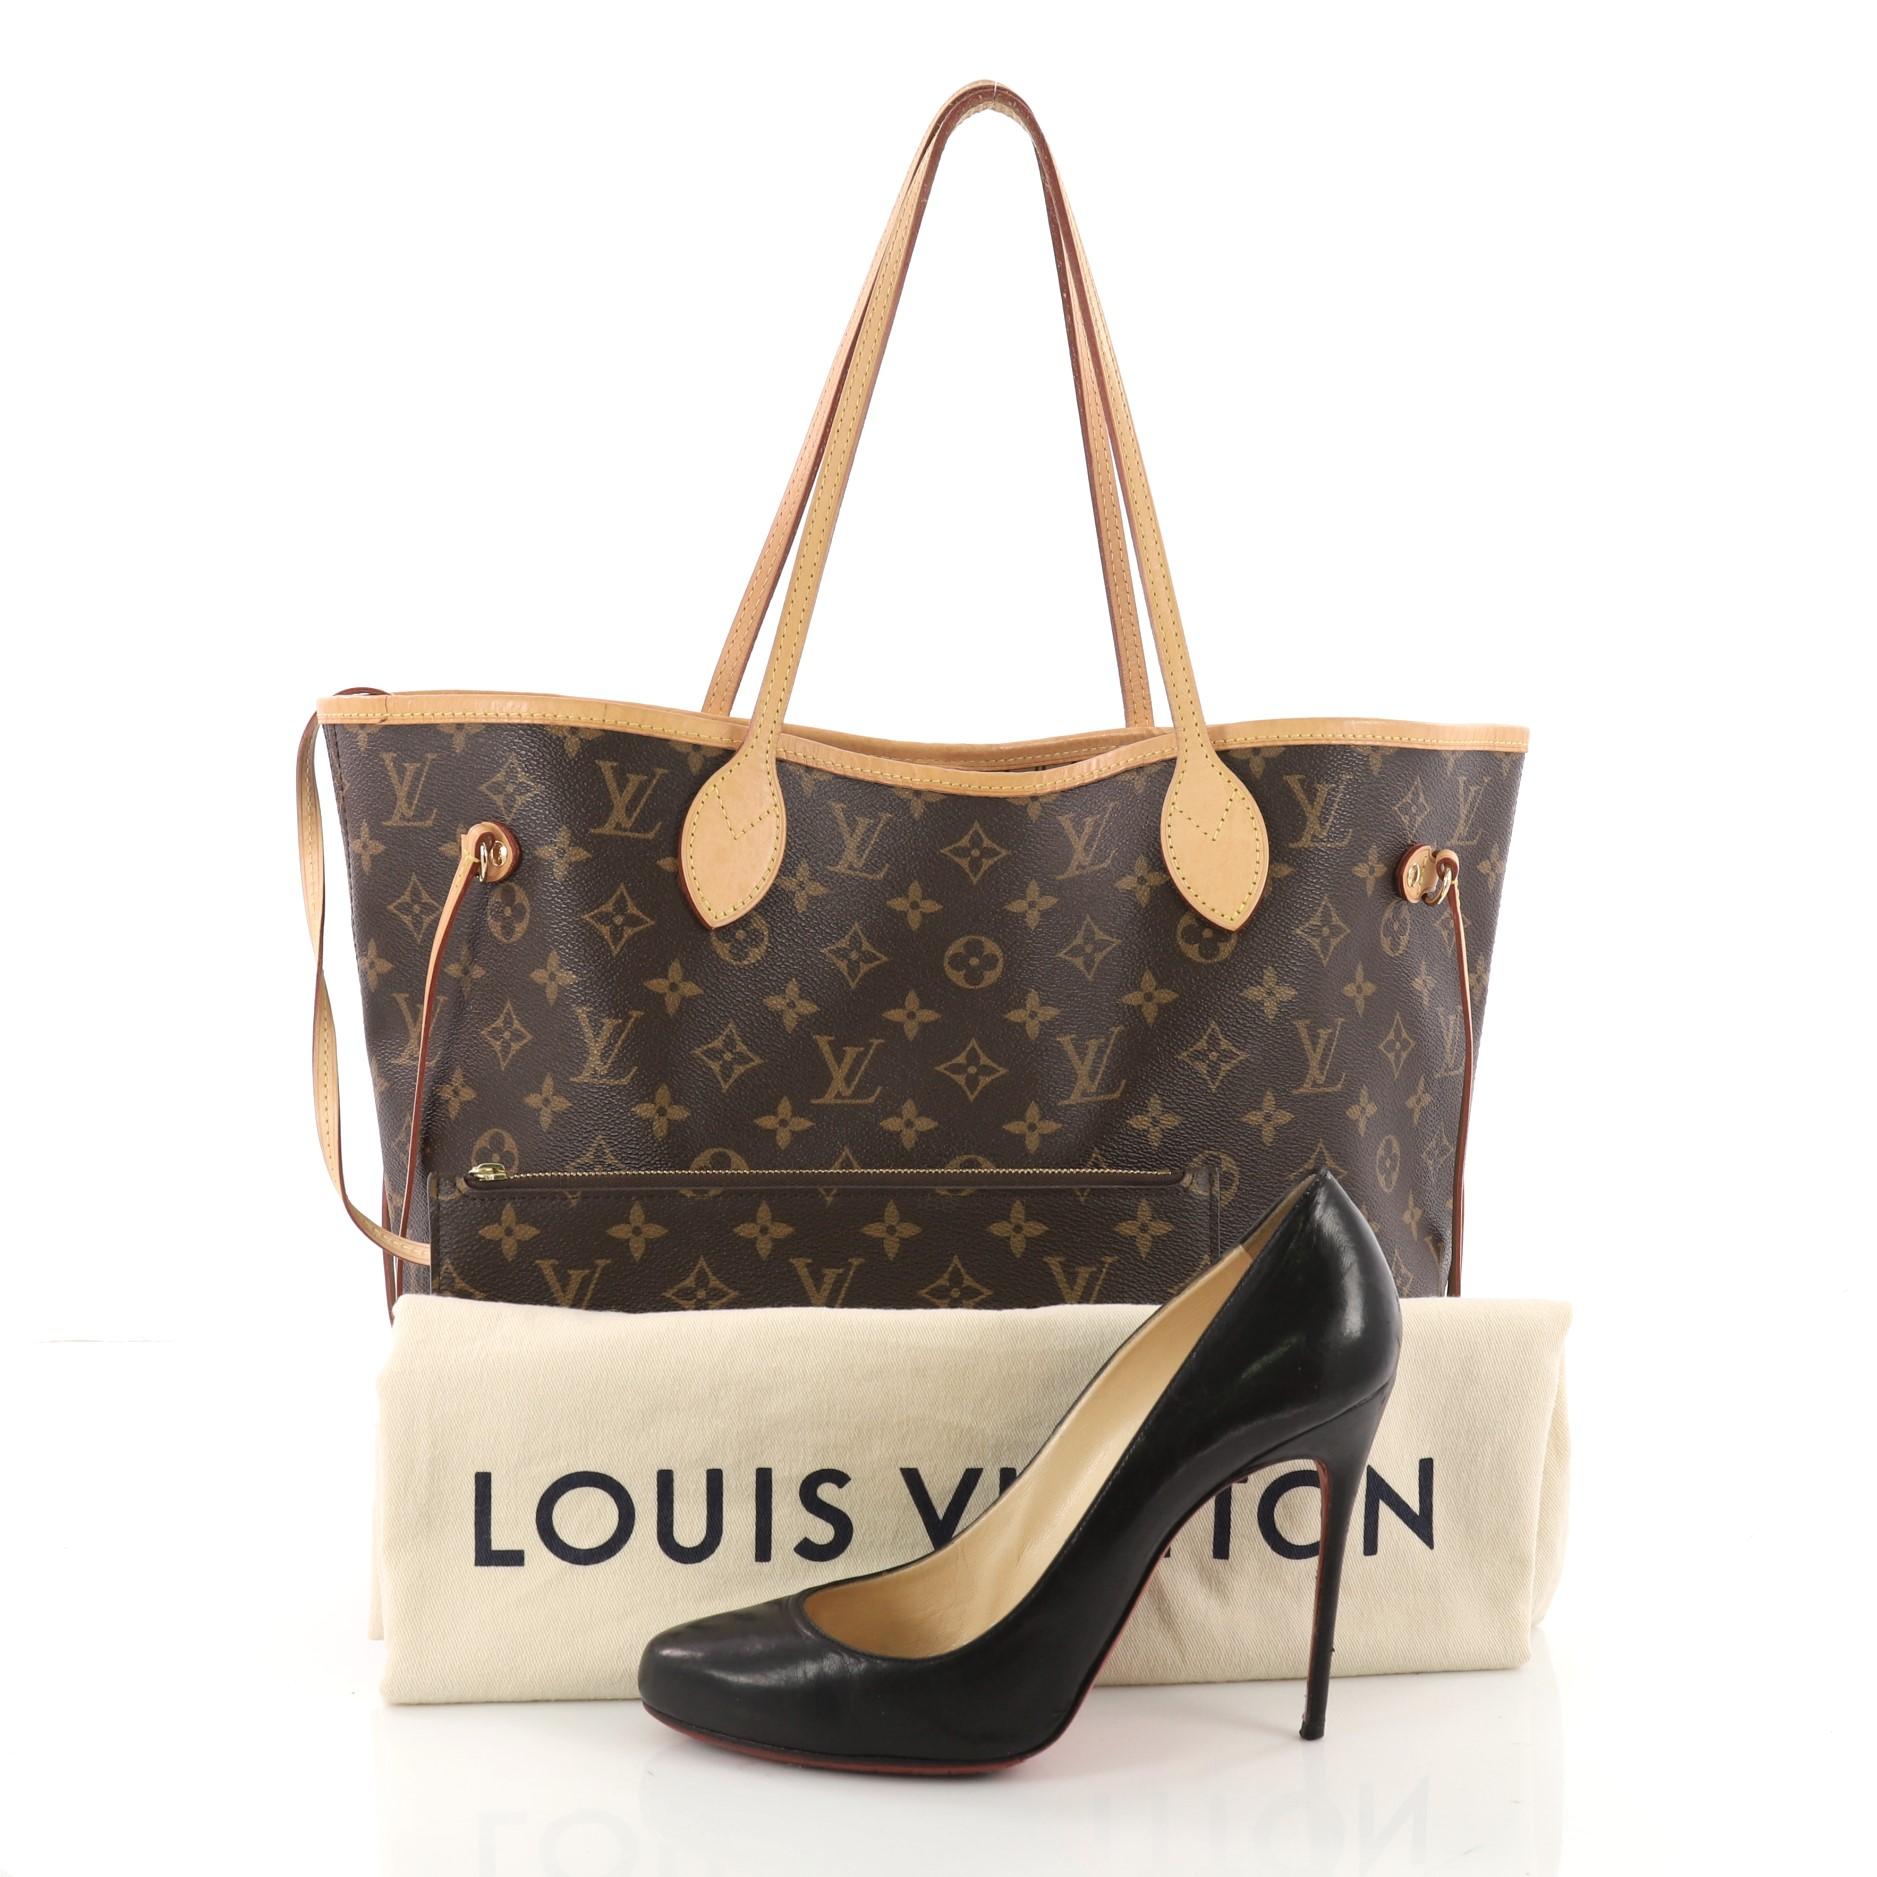 This authentic Louis Vuitton Neverfull NM Tote Monogram Canvas MM is a perfect companion for daily excursions. Crafted from signature brown monogram coated canvas, this iconic easy-to-carry bag features natural cowhide leather trims, dual tall